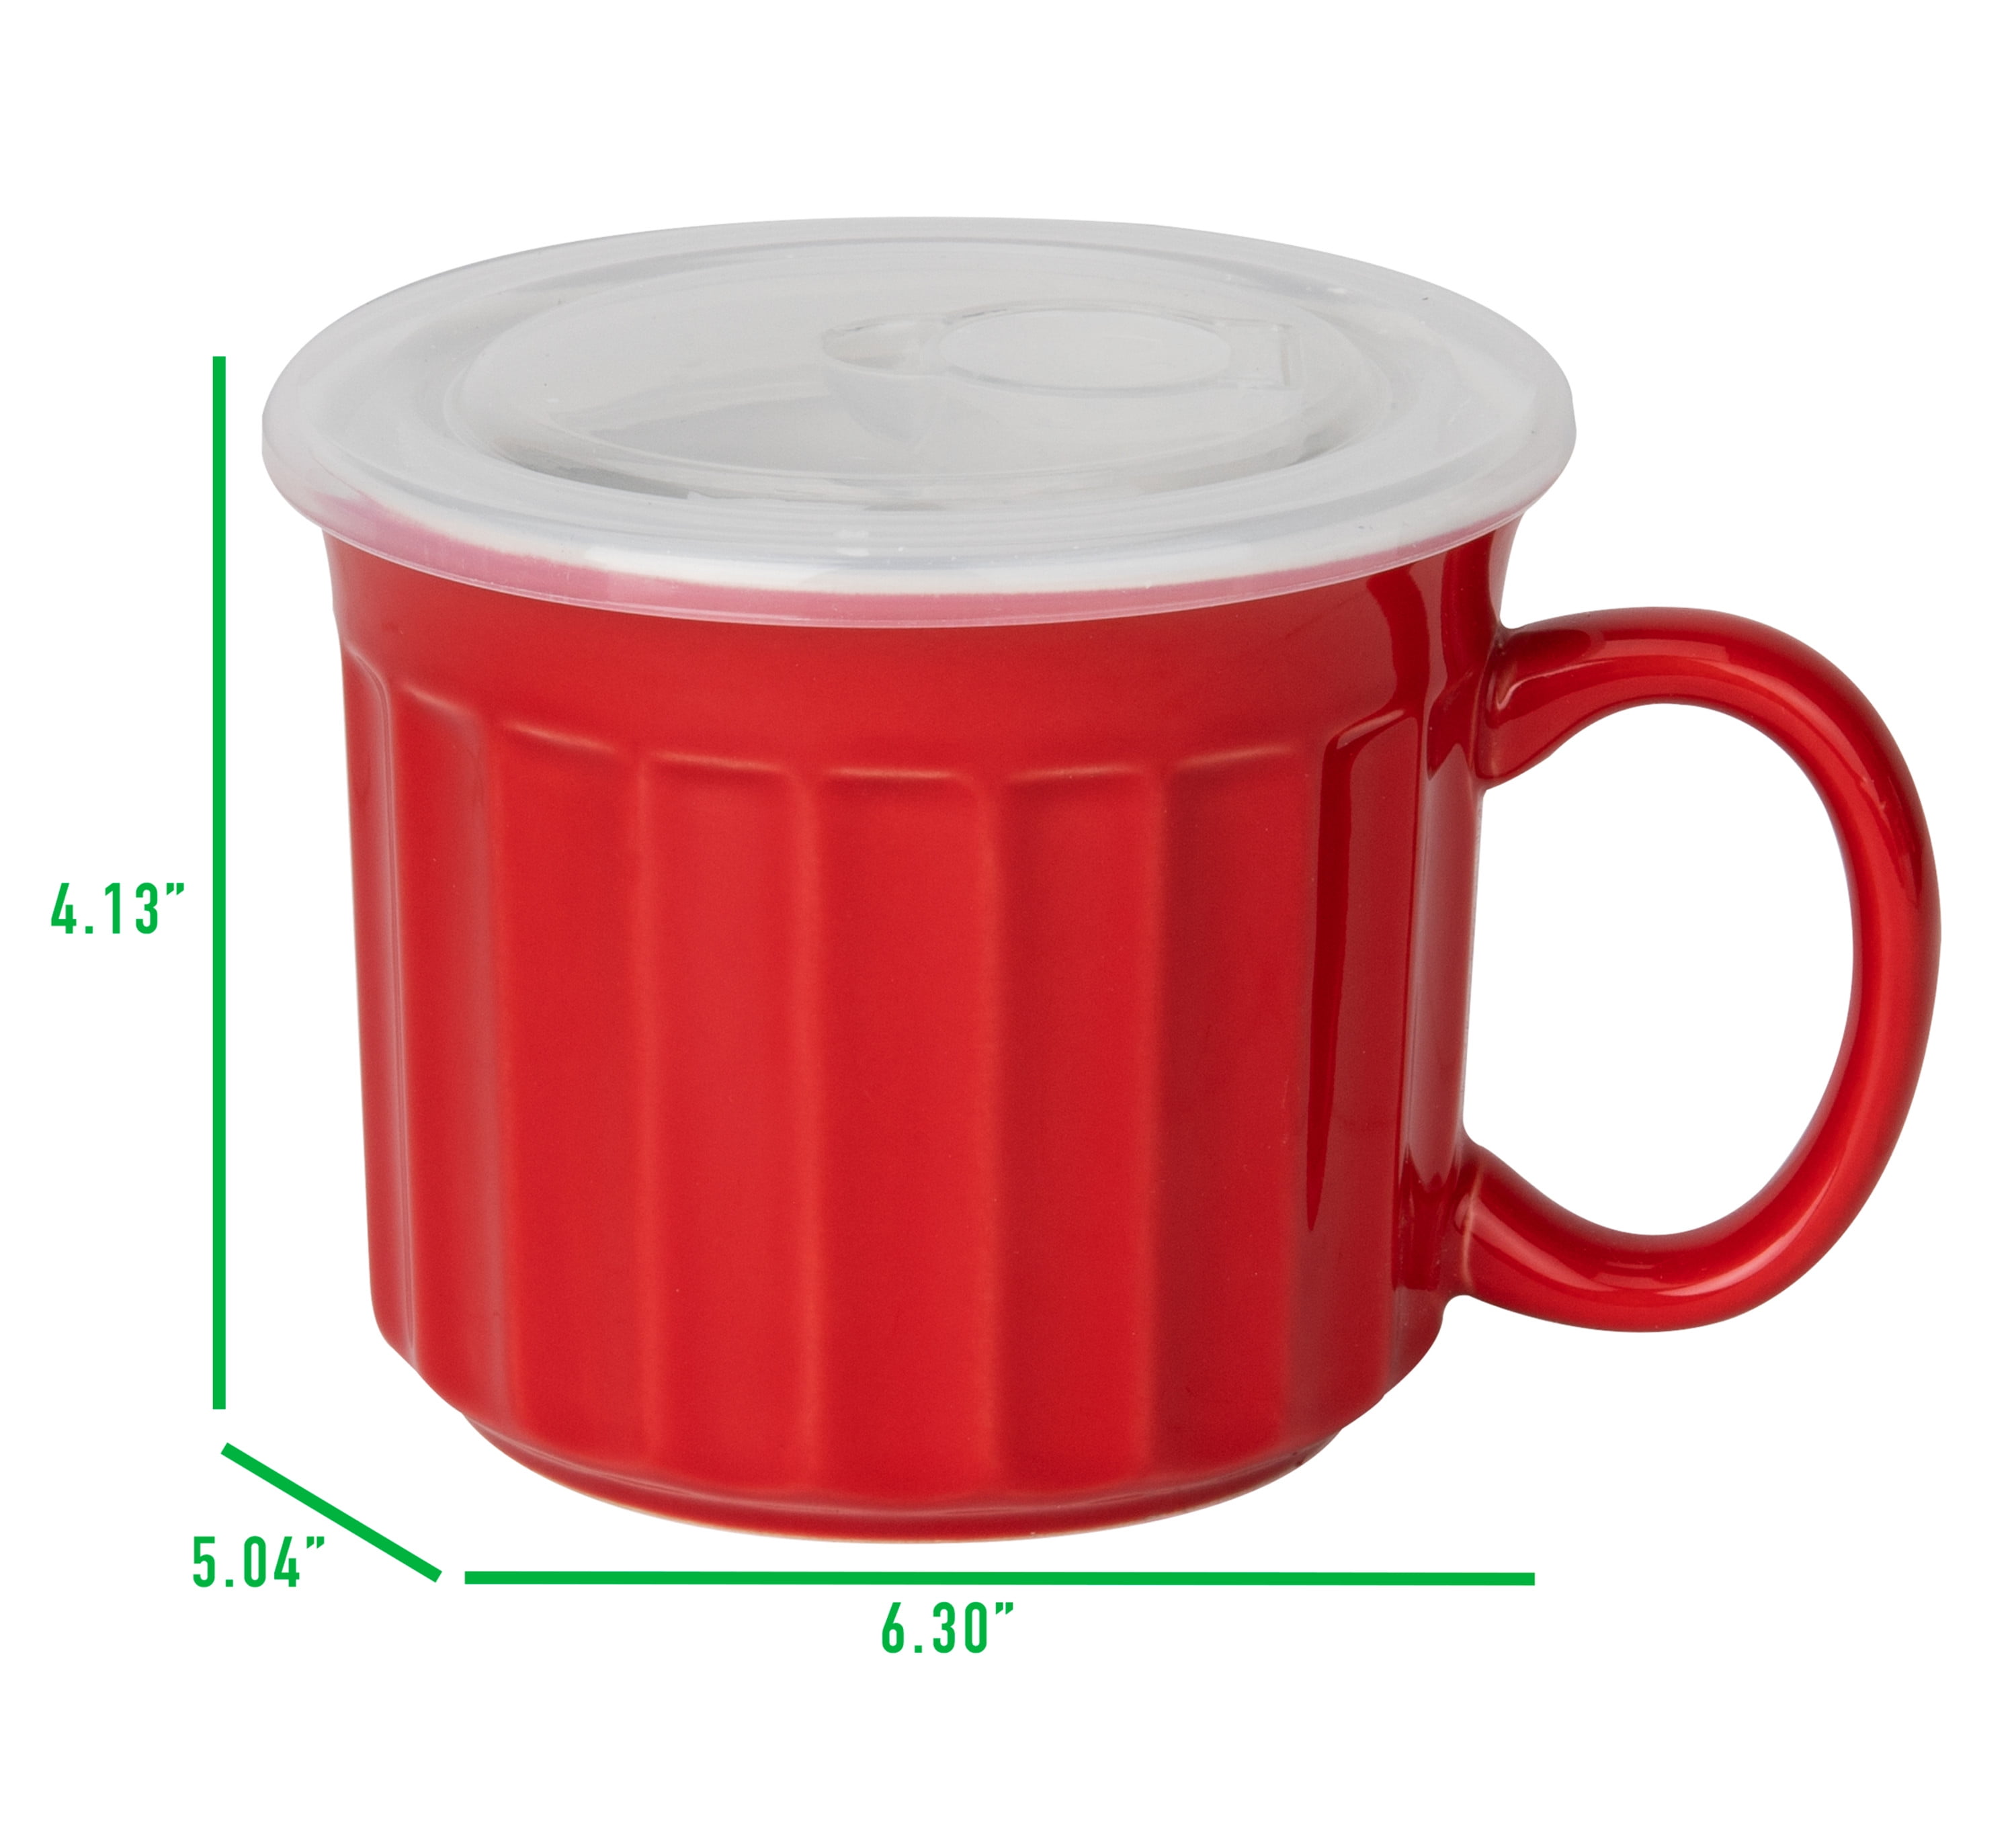 Microwave Soup Mug with Vented Lid by Chef's Pride - Miles Kimball